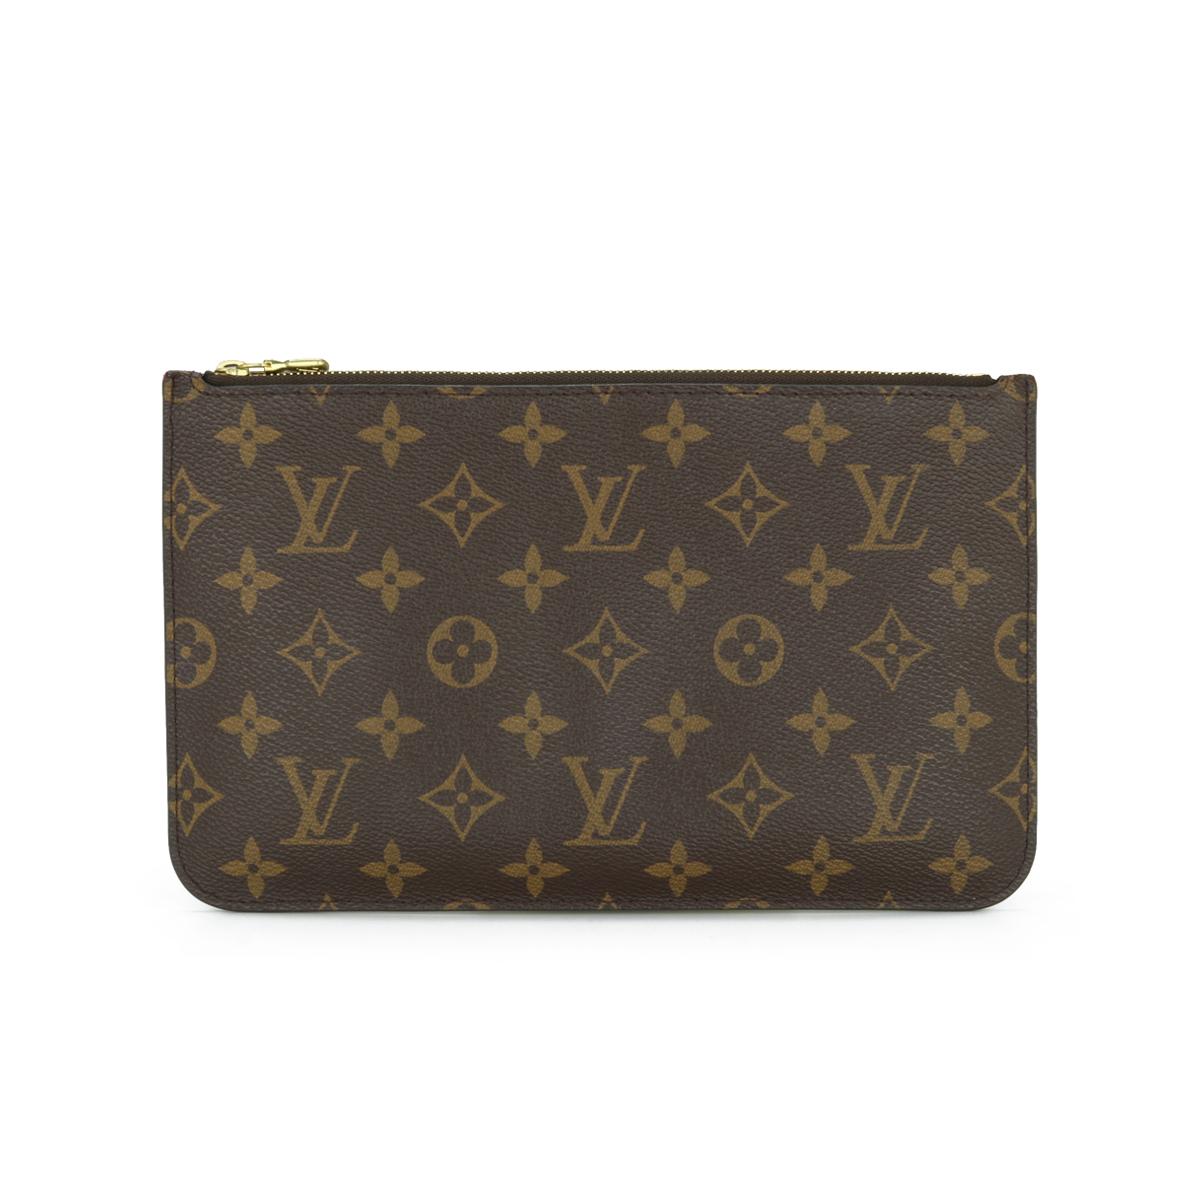 Louis Vuitton Neverfull MM Zip Pochette Pouch in Monogram with Beige Interior 2017.

This pouch is in good condition. 

- Exterior Condition: Good condition. The outside of the pouch shows signs of wear. There is inking wear to the corners and two